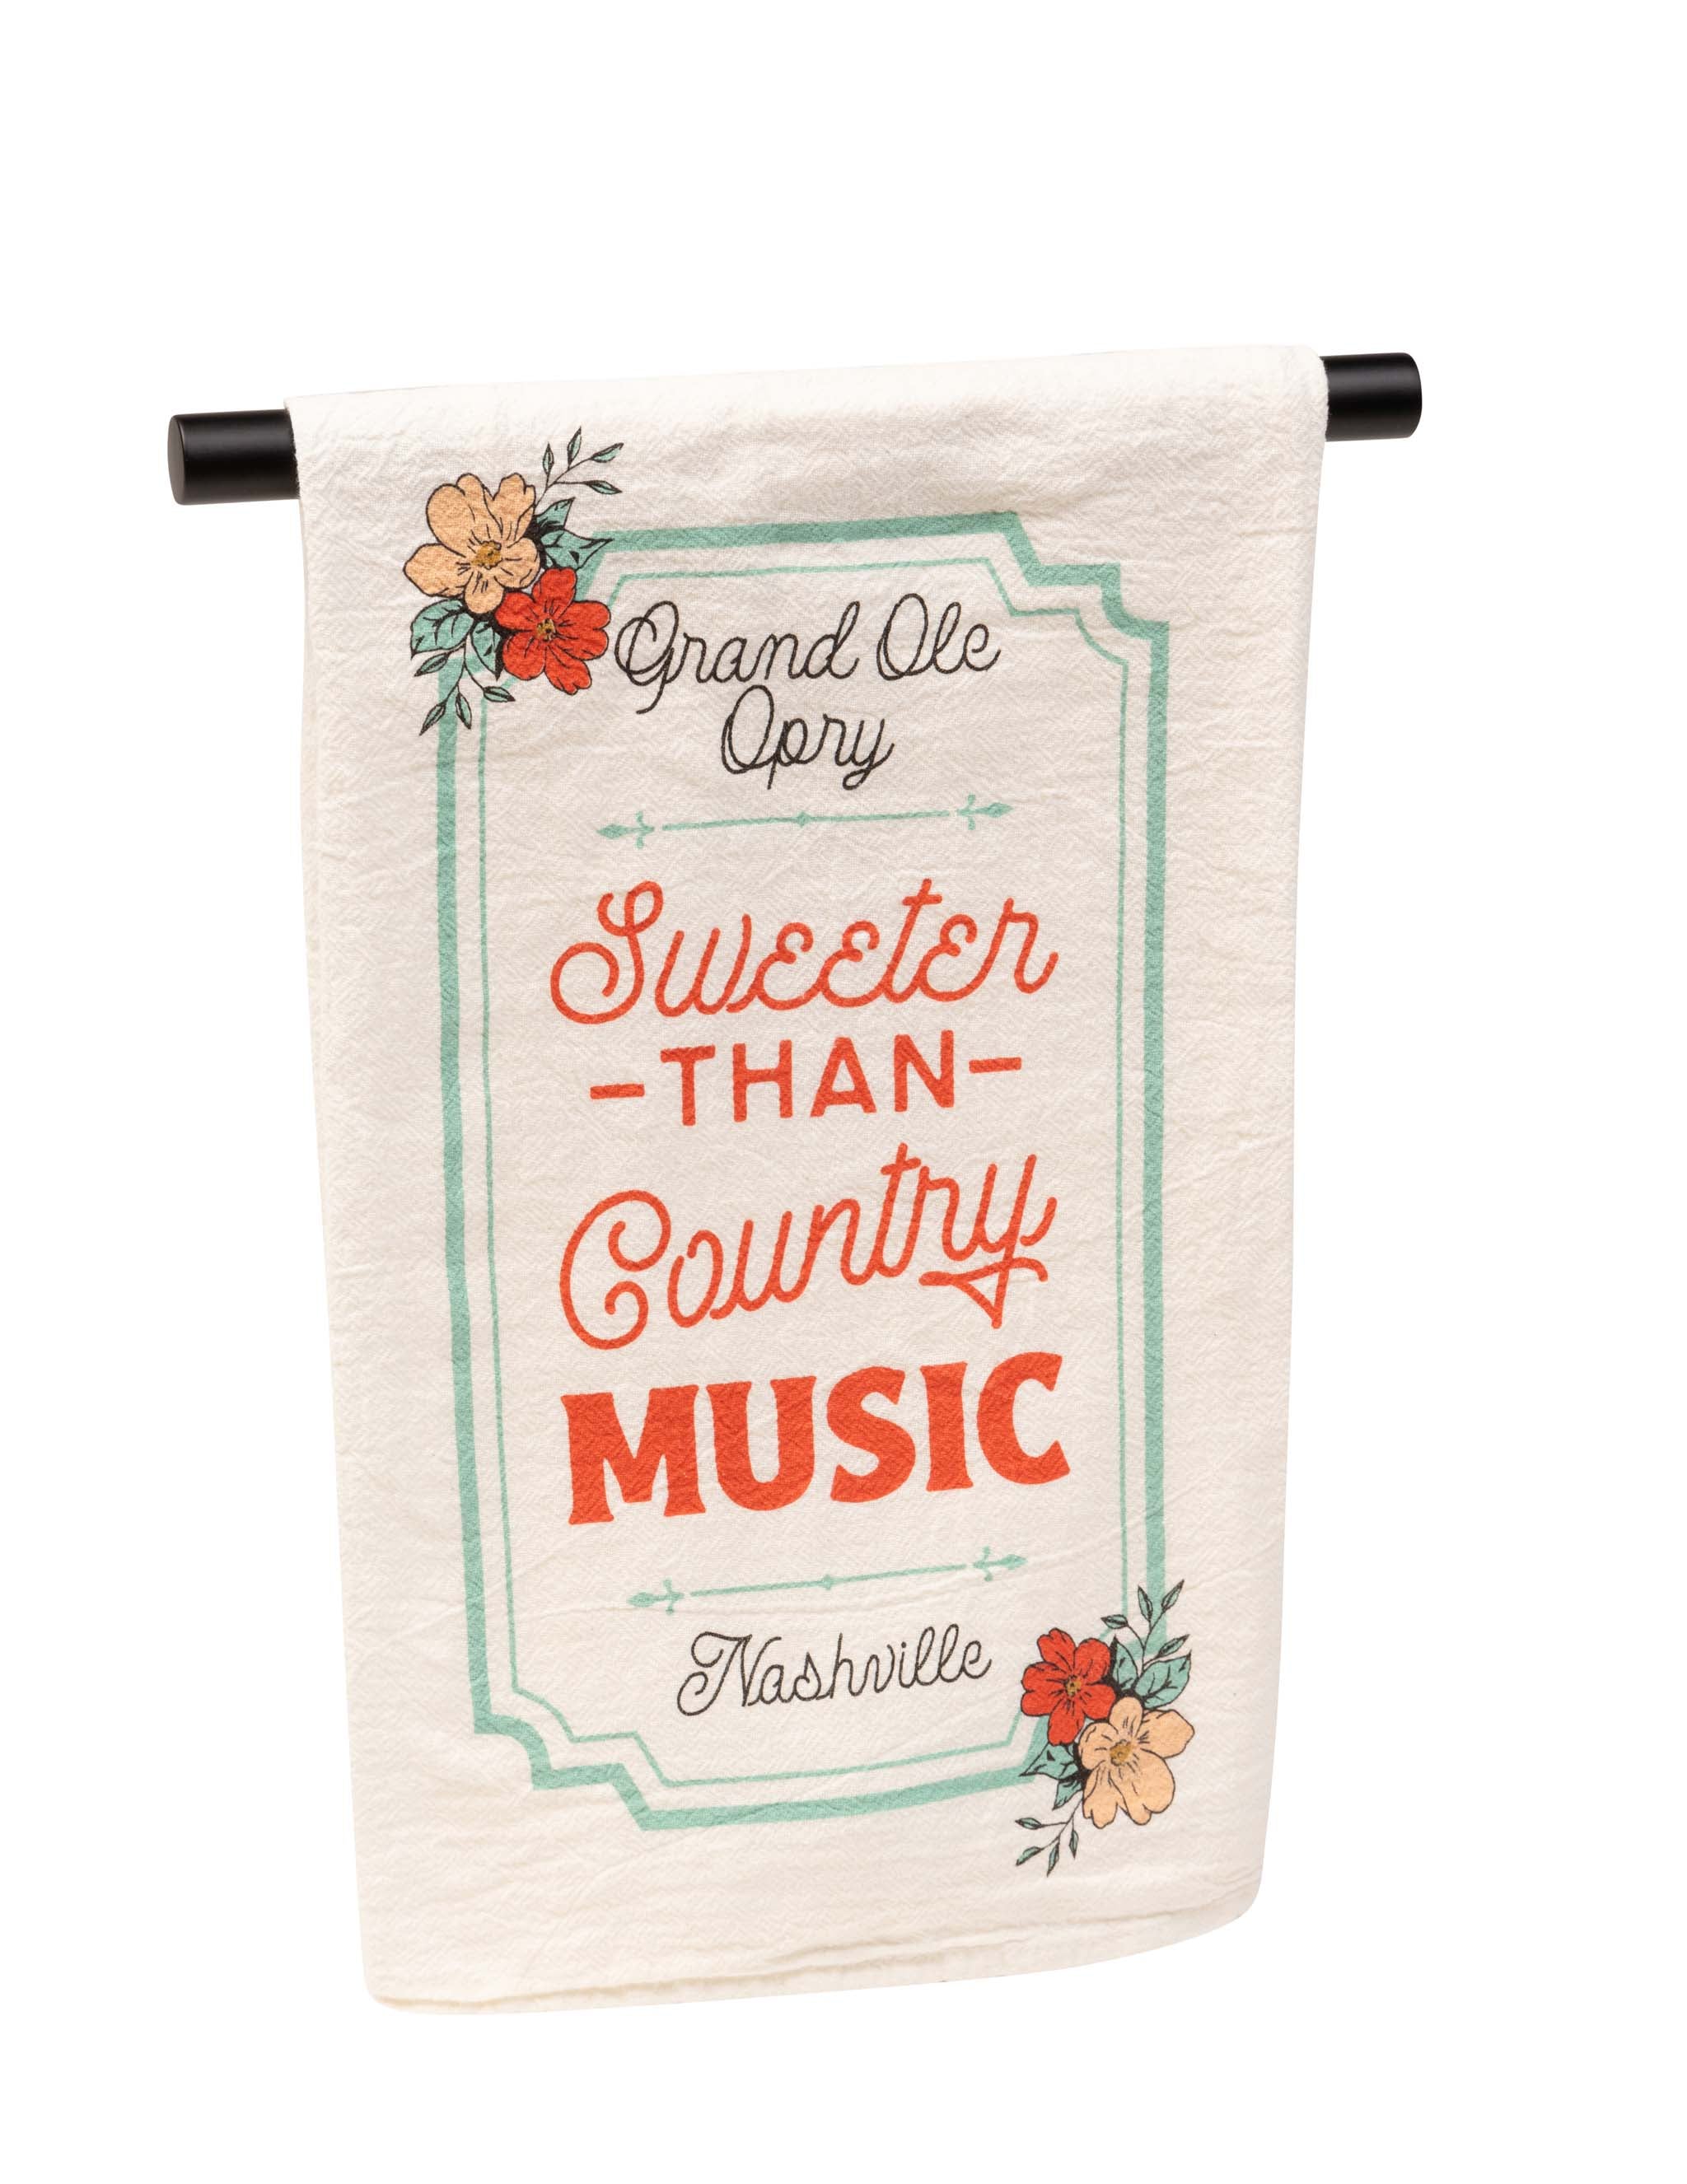 Opry Sweeter Than Country Music Tea Towel